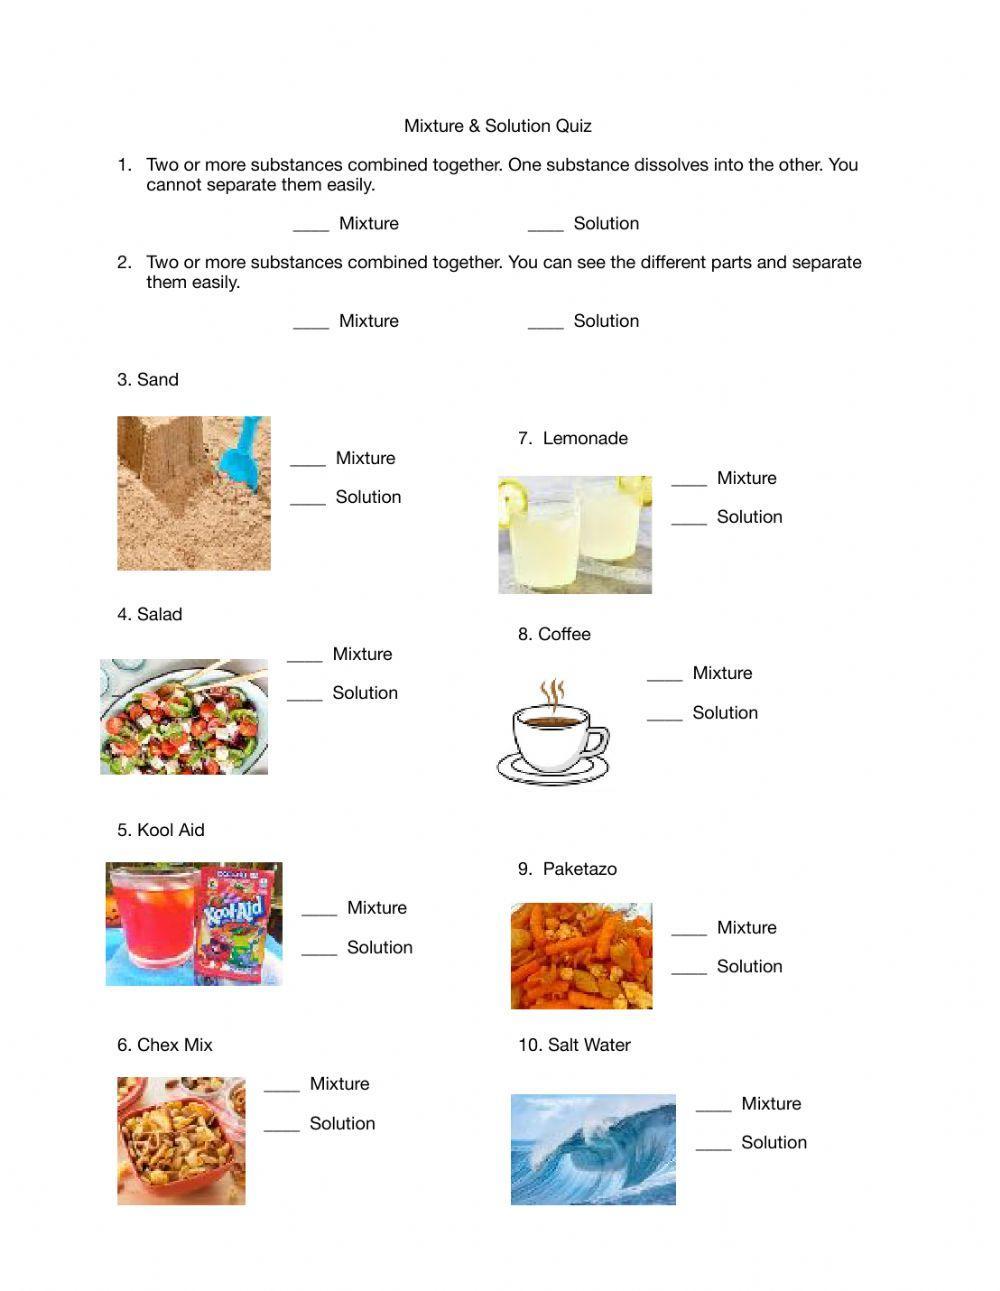 Mixture and Solution Quiz